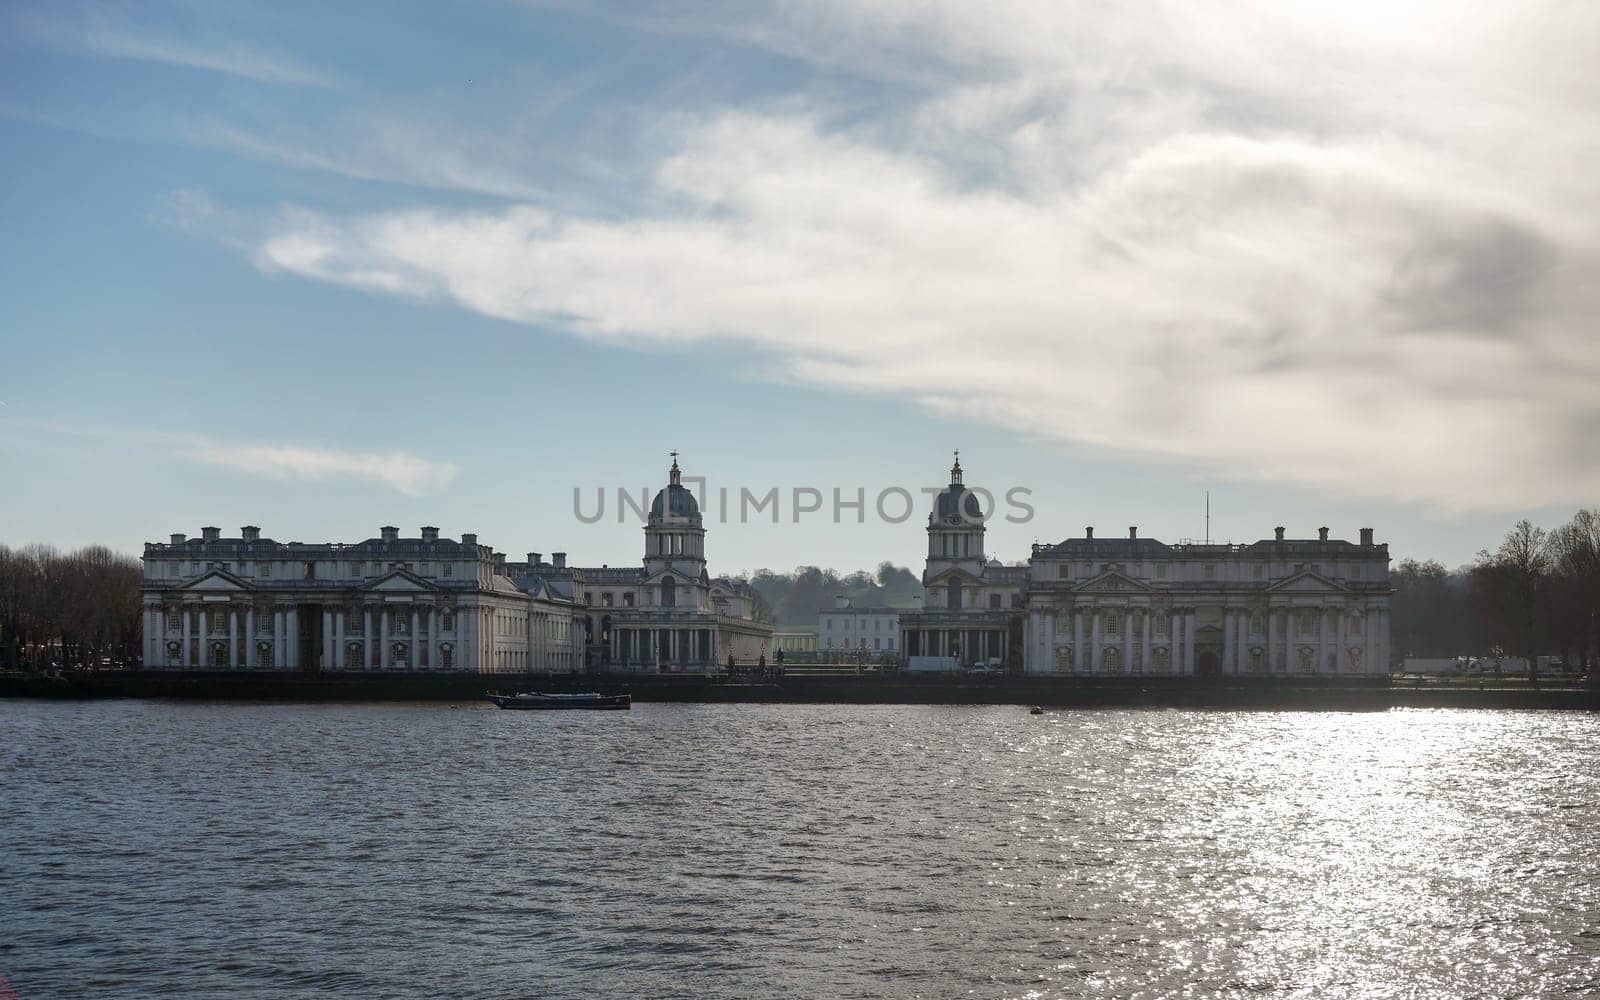 Royal Hospital School) over river Thames, on winter morning - strong sun backlight reflects in water.